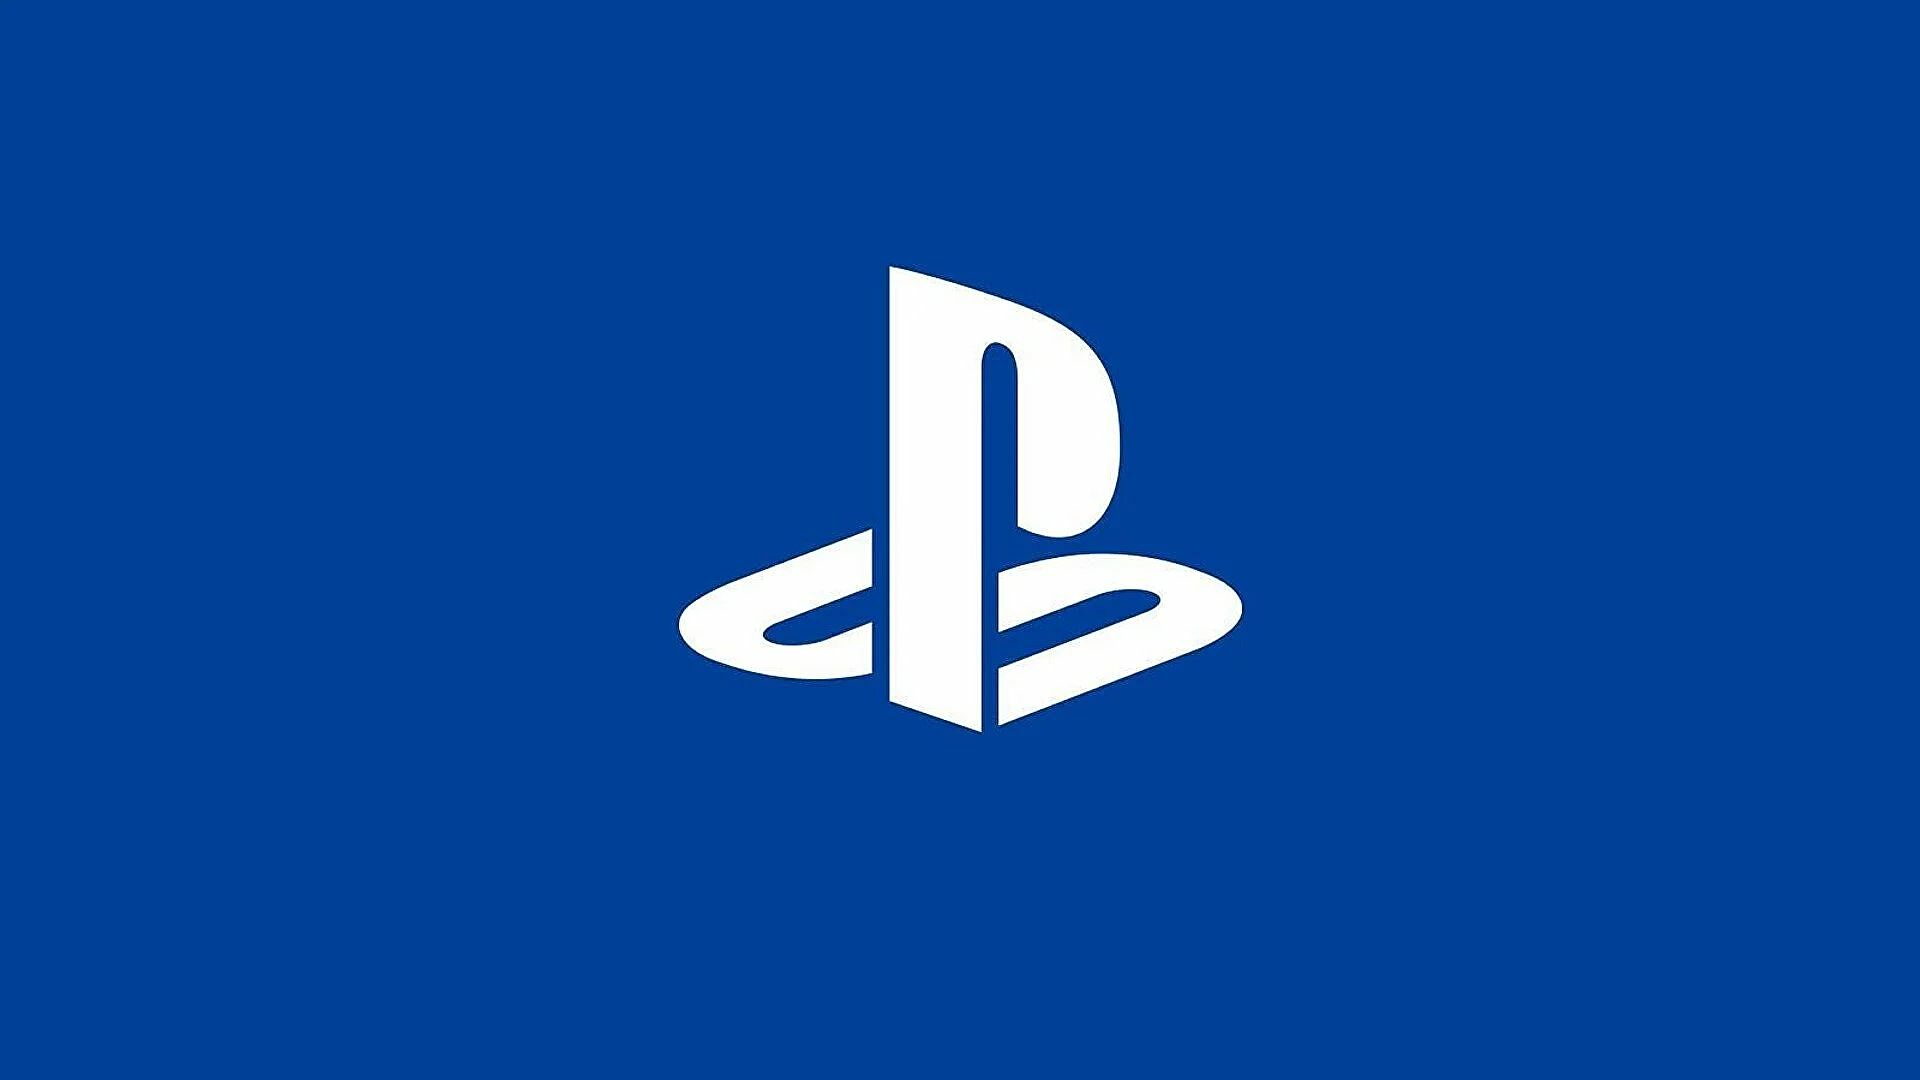 Sony’s first-party games won’t be released on PC for “at least a year” after PlayStation launch